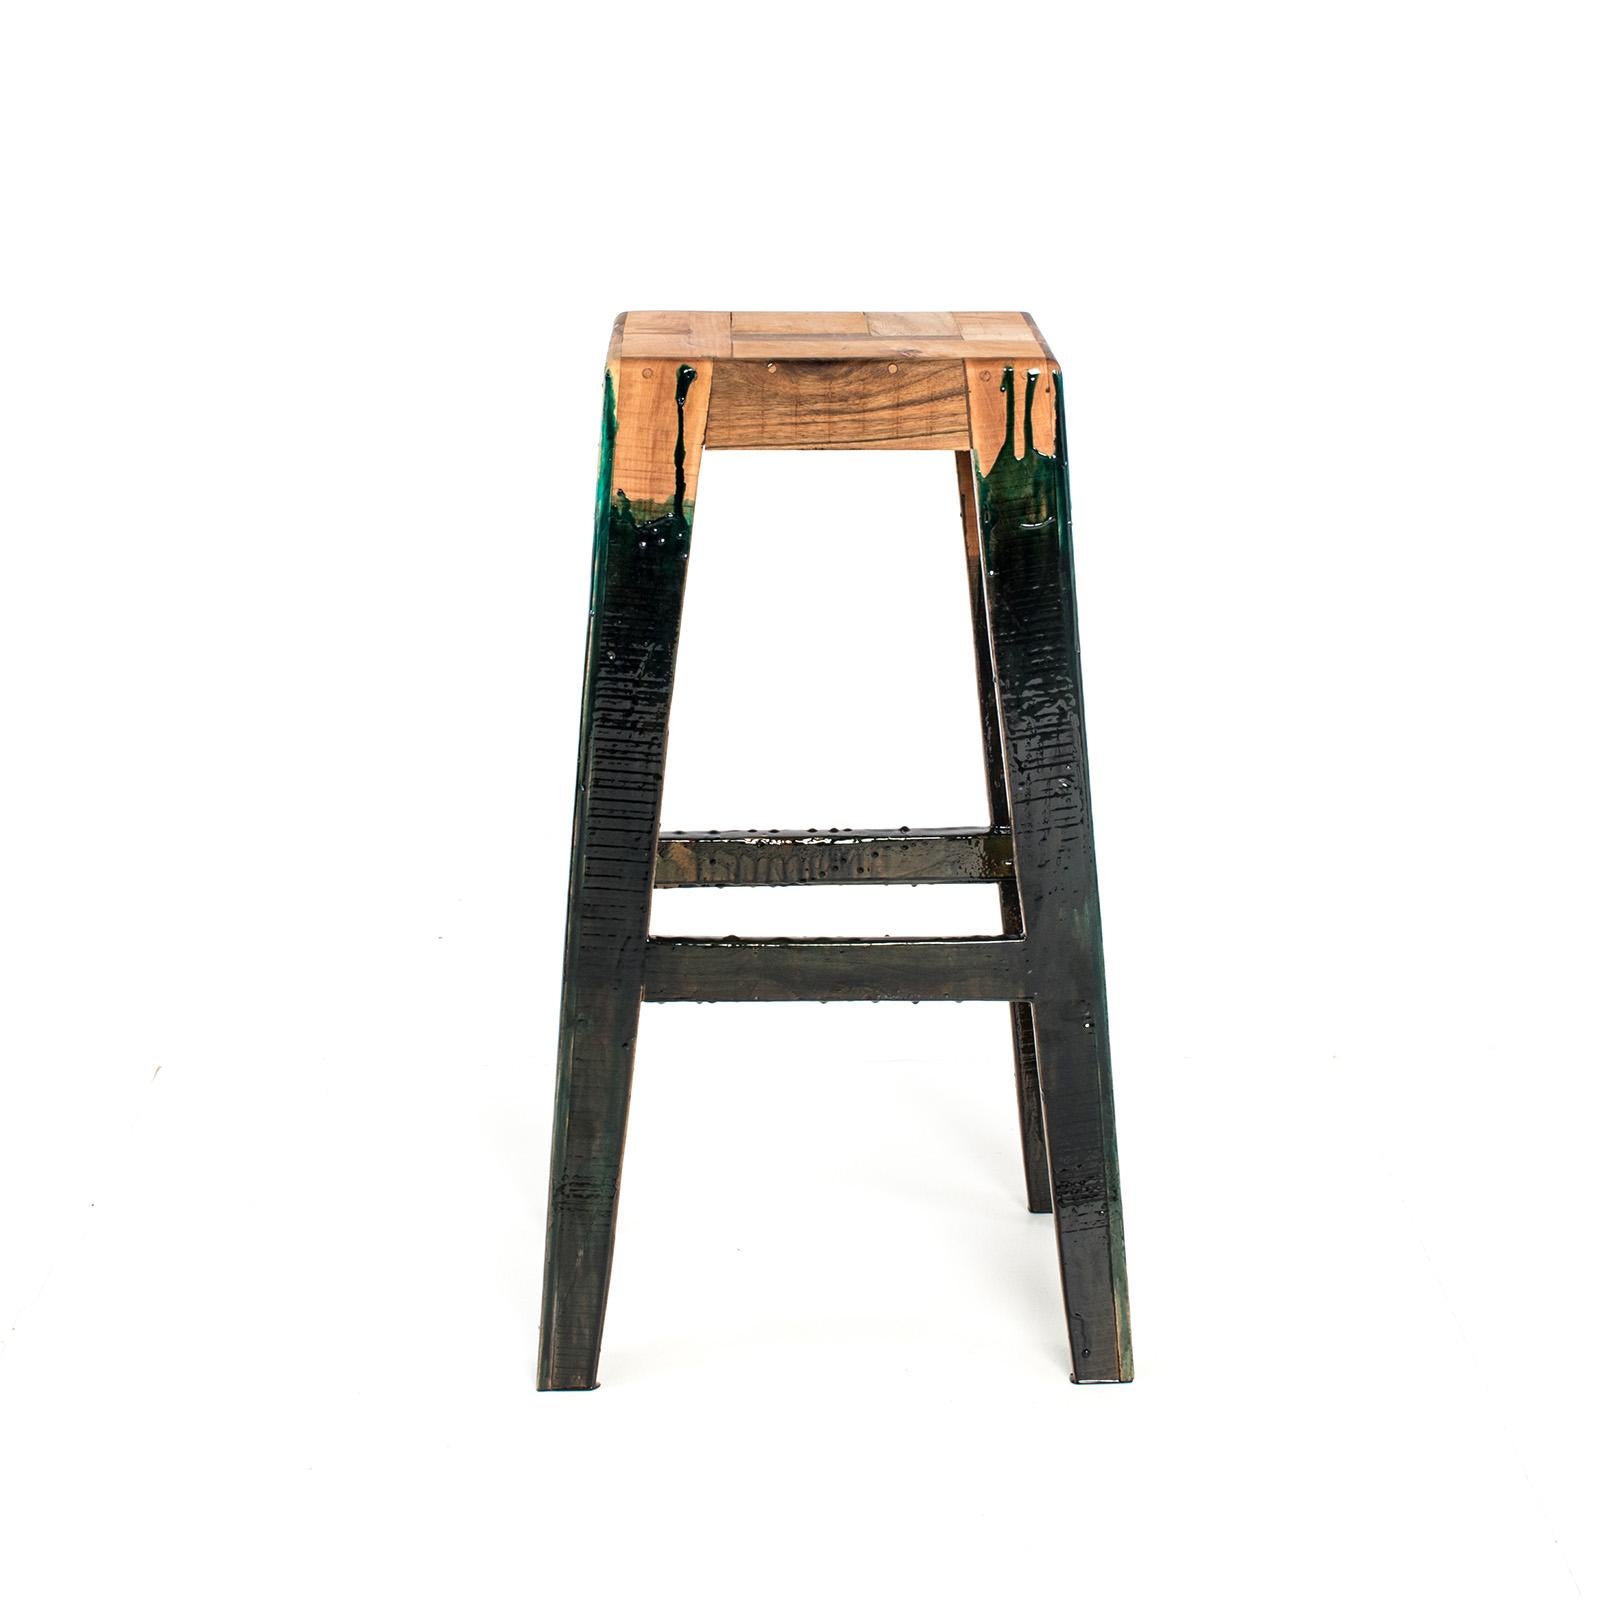 The bar stool is made of an antique piece of walnut wood floorboard, handcrafted Elmwood, and Plexiglass. The footrest heights are all different to accommodate all ages and heights. 

Materials: Walnut, Alder and Oak, Acrylic, Brass and Resin.